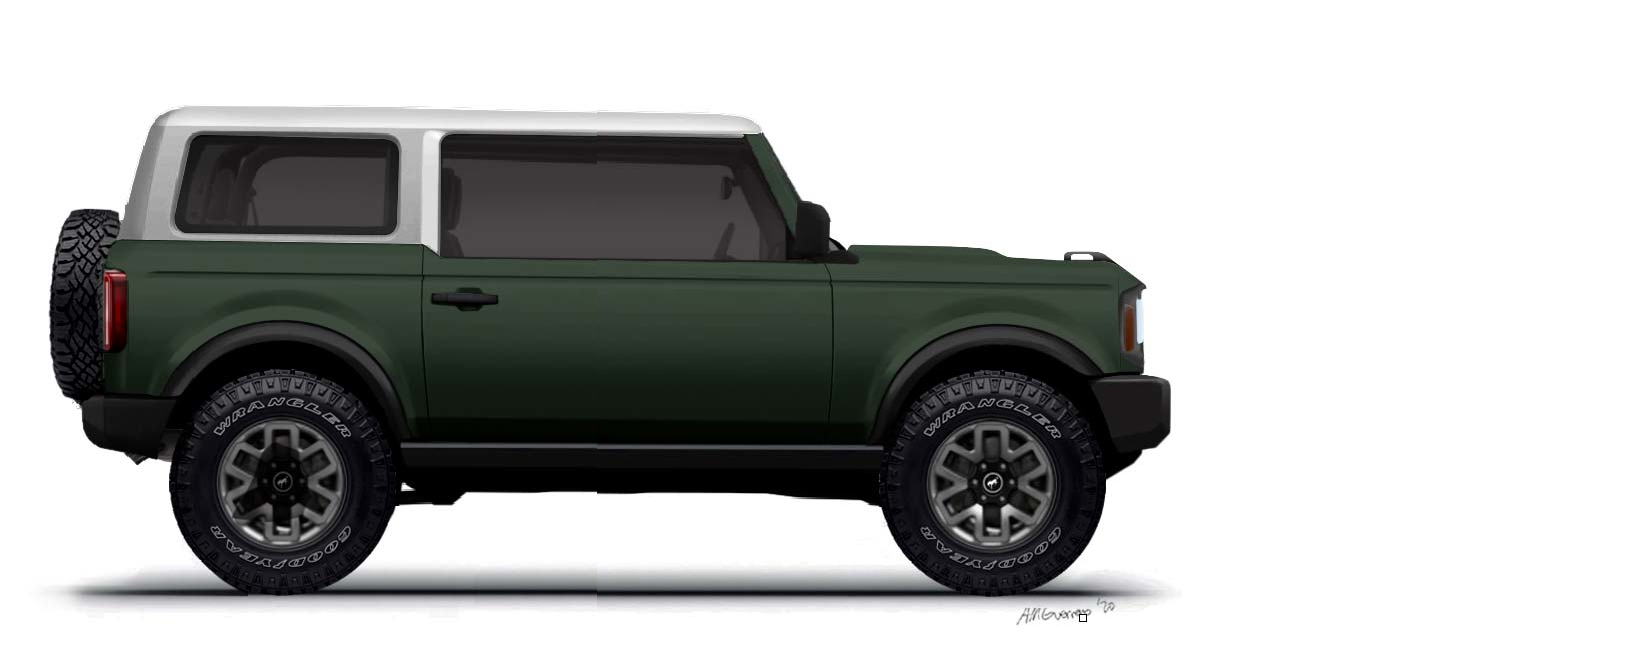 Ford Bronco What if 2-door Bronco is longer than it looks? LWB